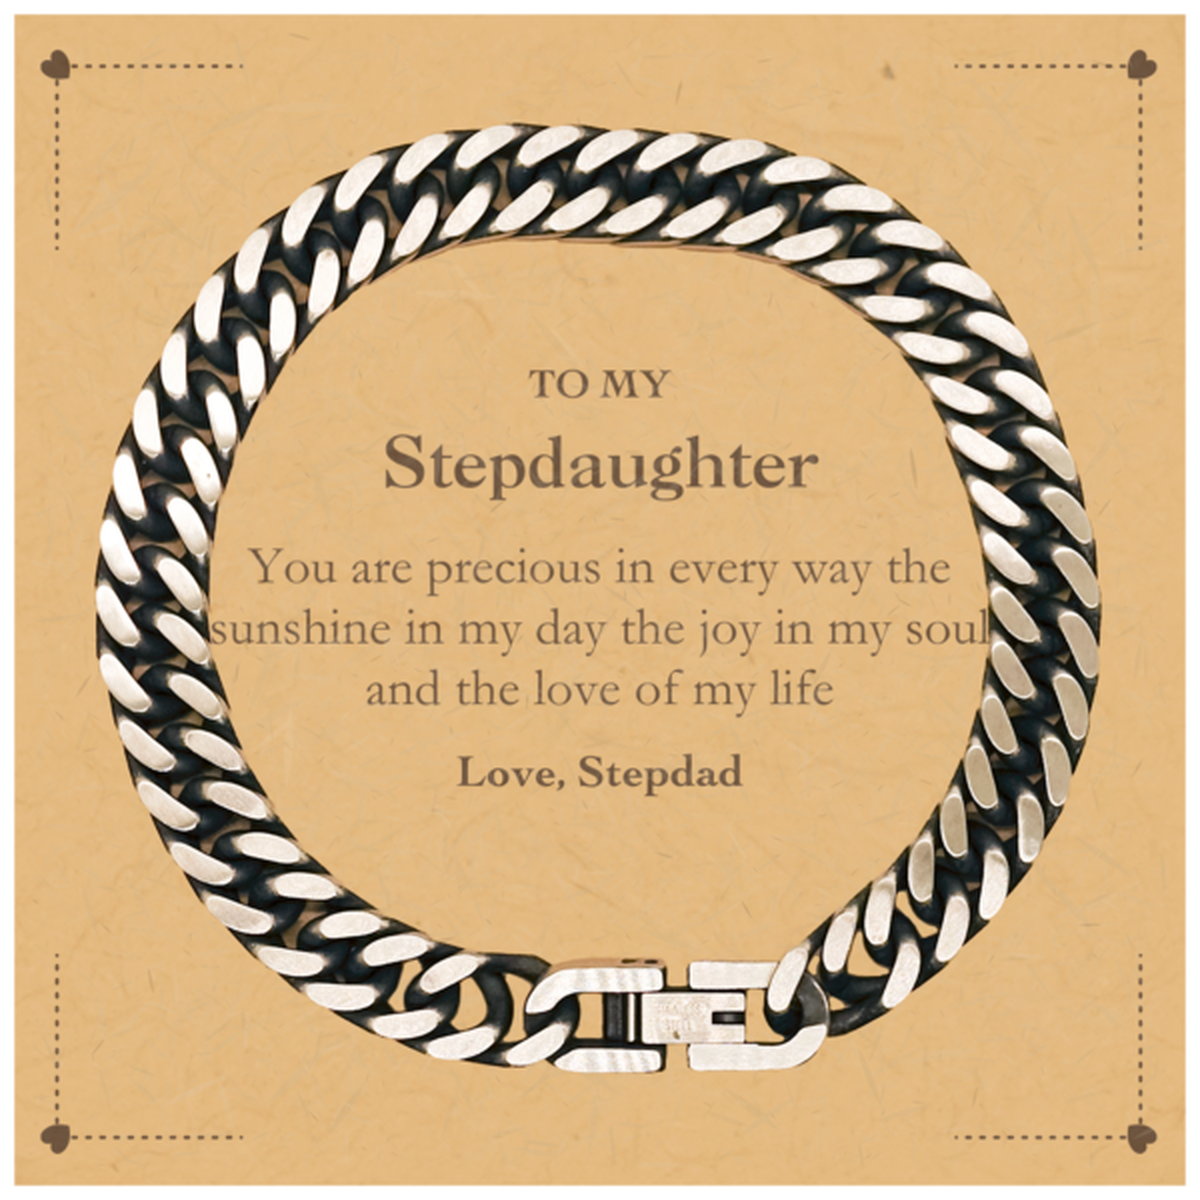 Graduation Gifts for Stepdaughter Cuban Link Chain Bracelet Present from Stepdad, Christmas Stepdaughter Birthday Gifts Stepdaughter You are precious in every way the sunshine in my day. Love, Stepdad